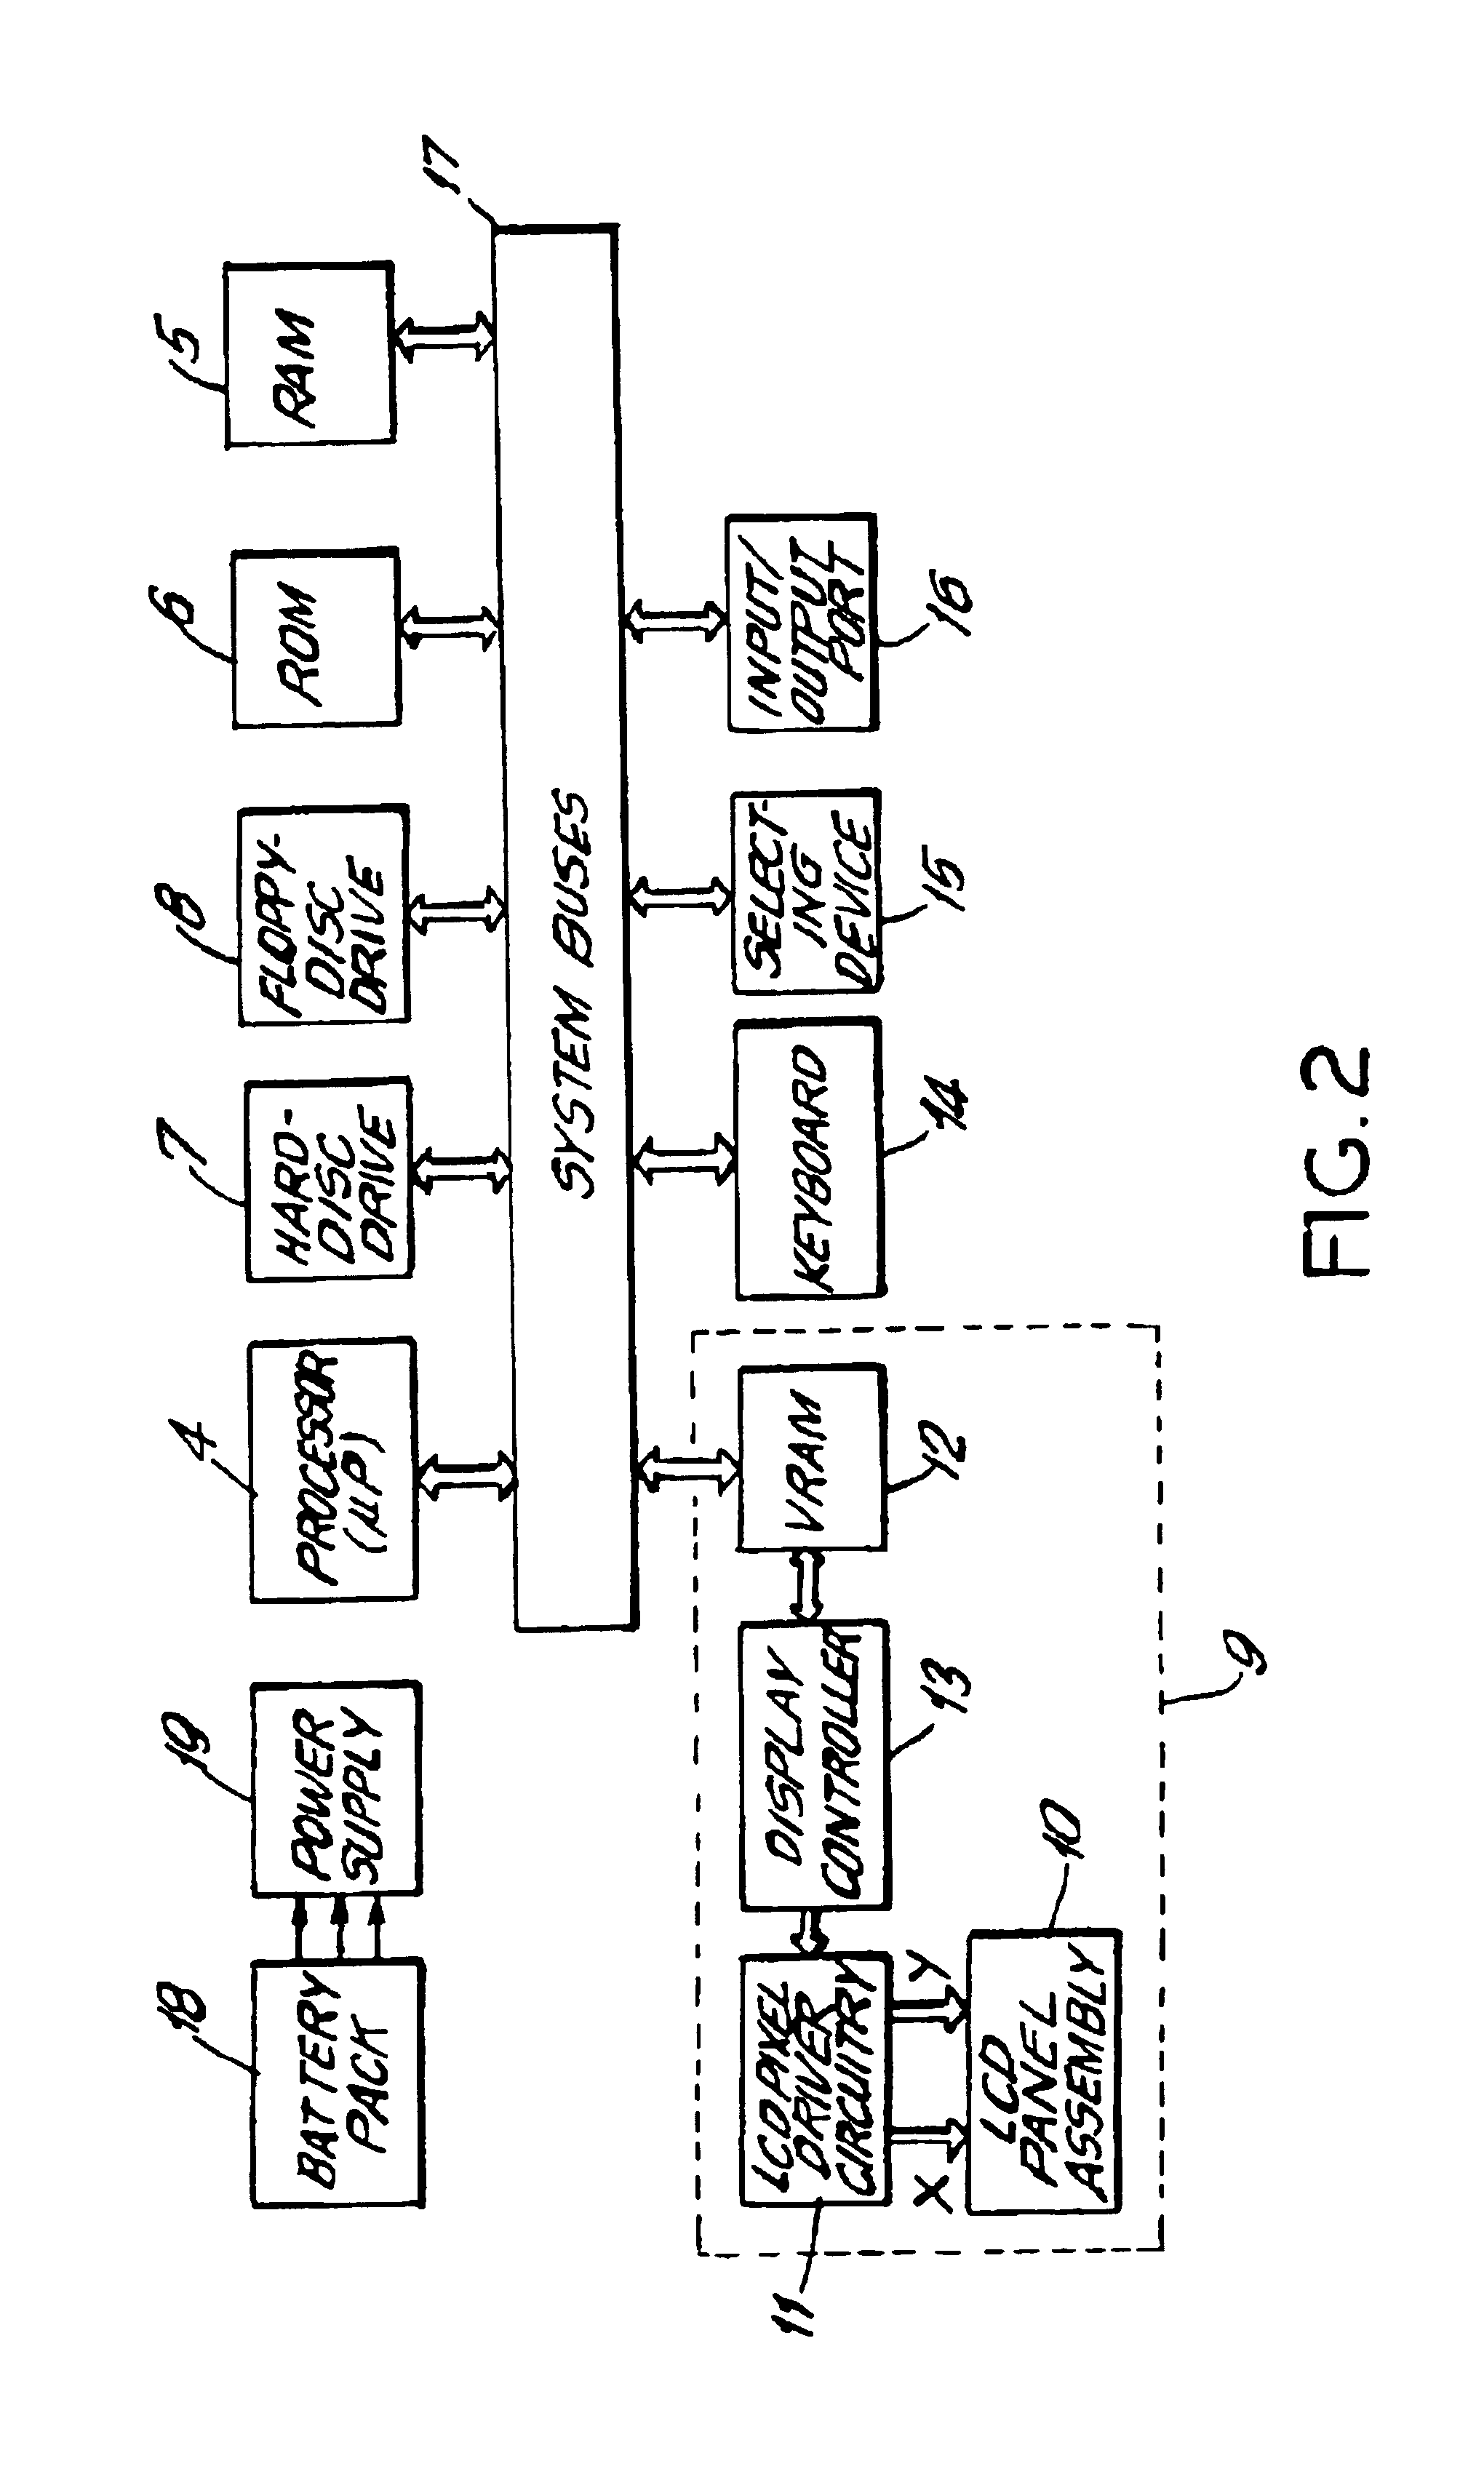 Electro-optical backlighting panel for use in computer-based display systems and portable light projection device for use therewith